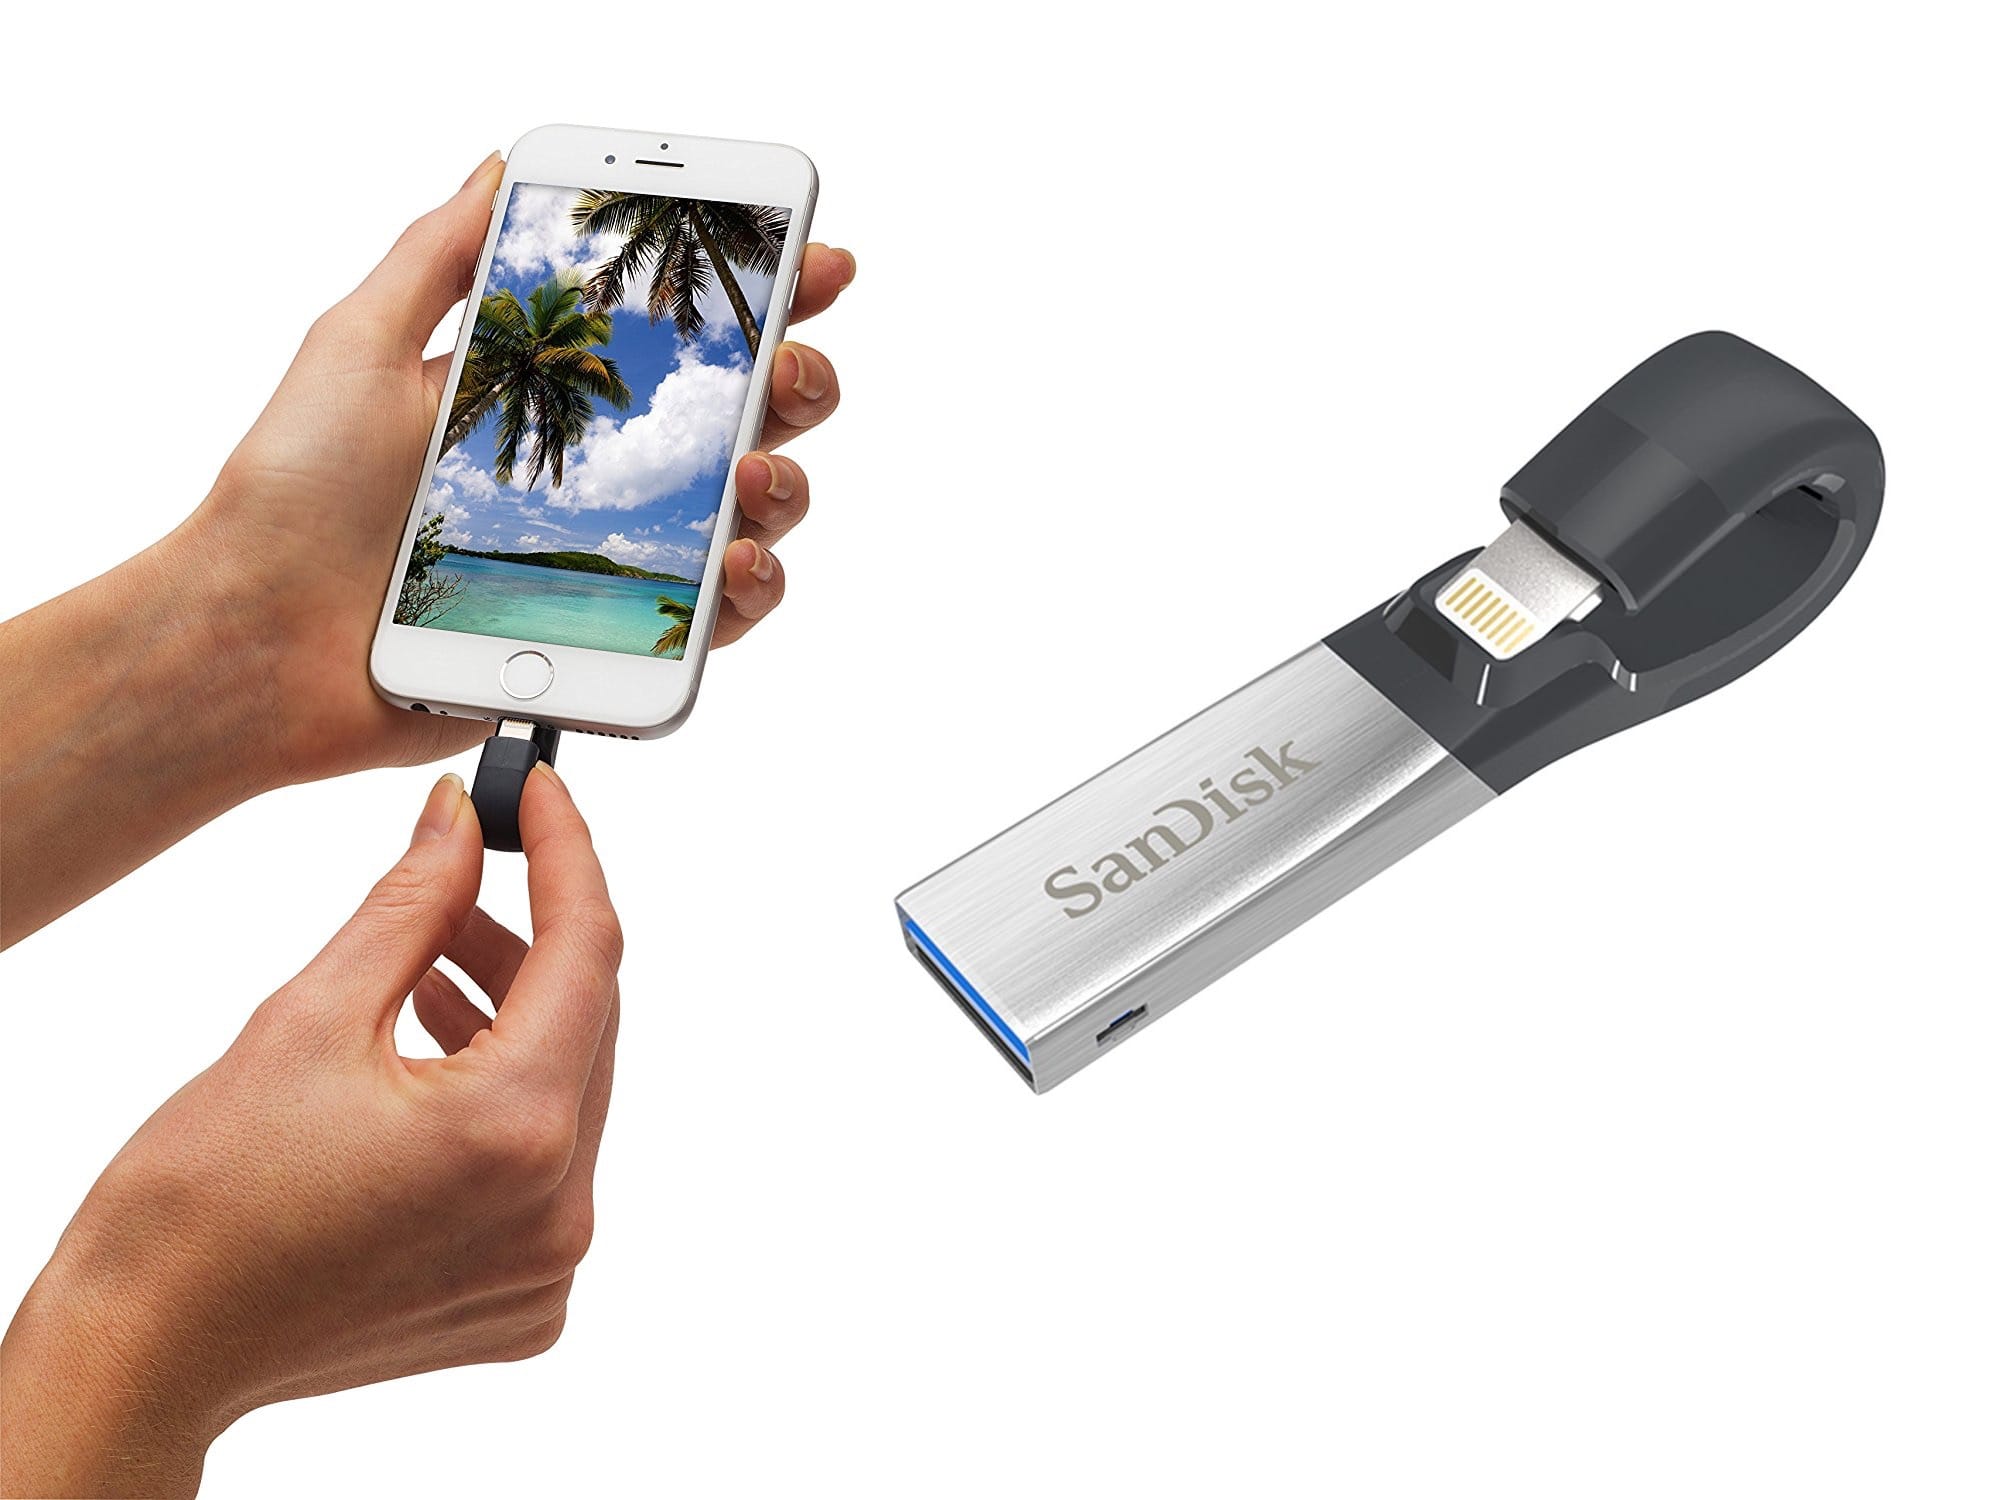 Download iphone to mac by usb 3.0